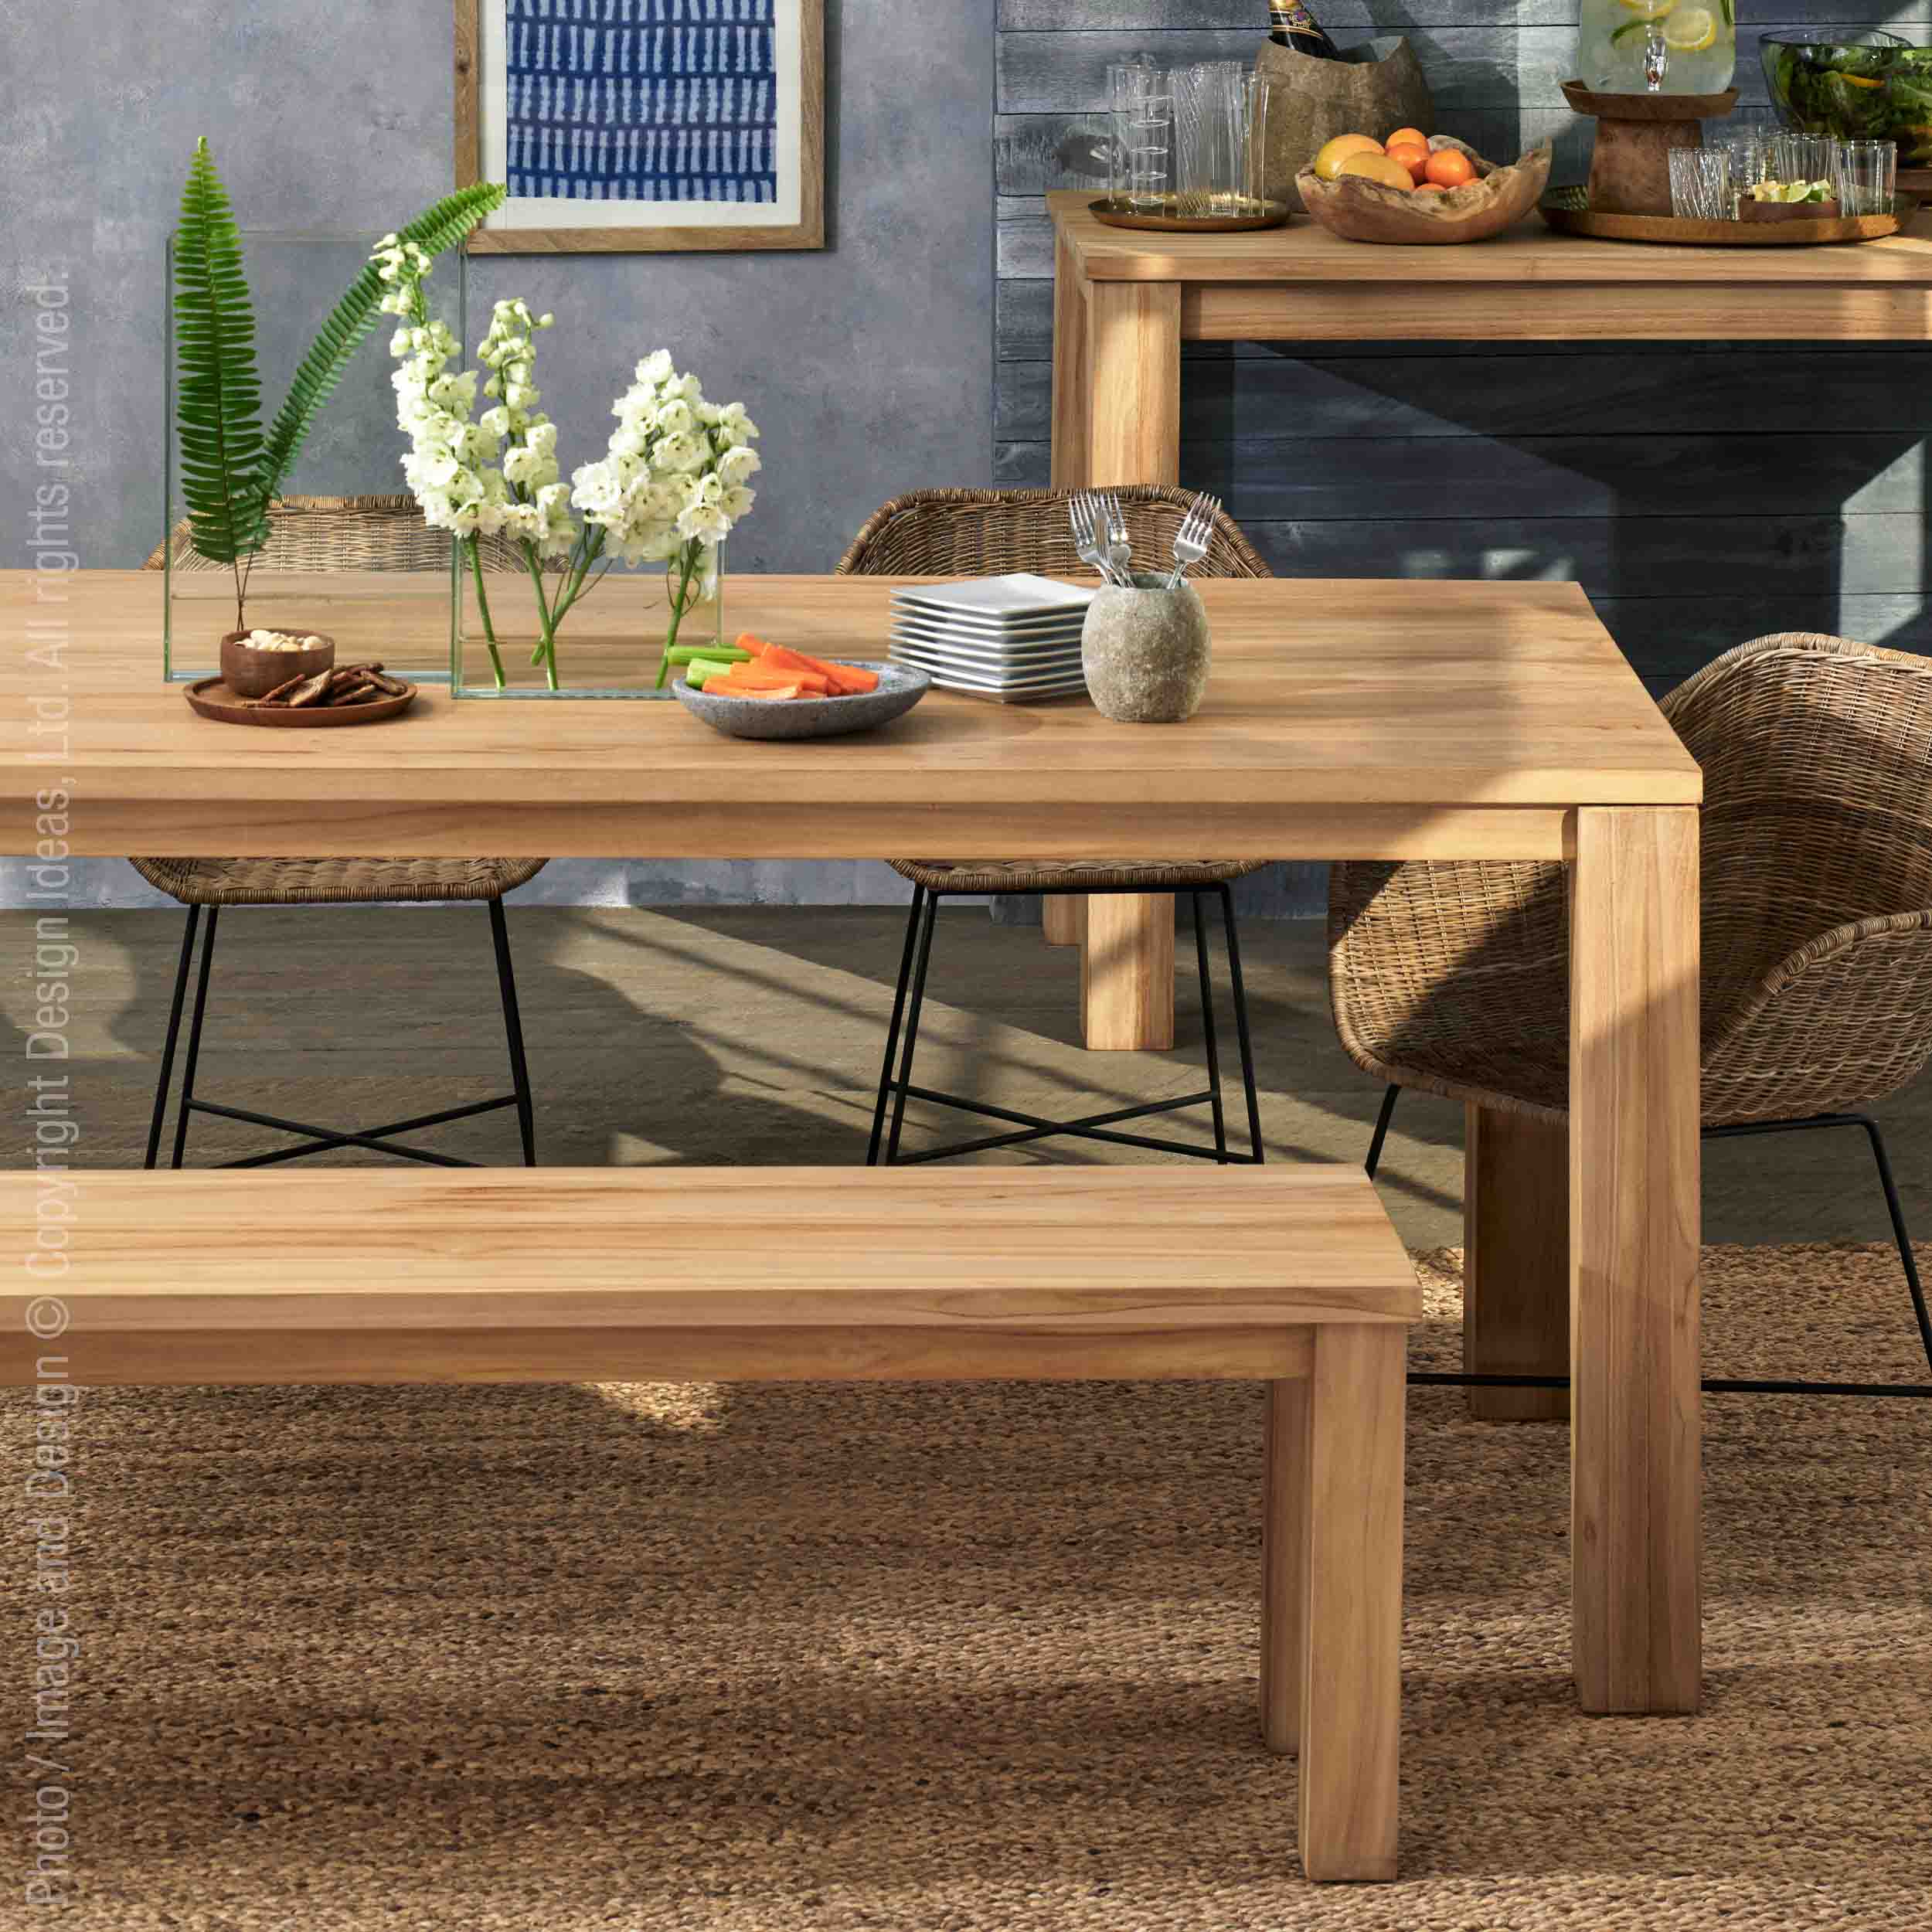 Takara™ Teak Dining Table | Image 1 | From the Takara Collection | Masterfully assembled with natural teak for long lasting use | Available in gray color | texxture home